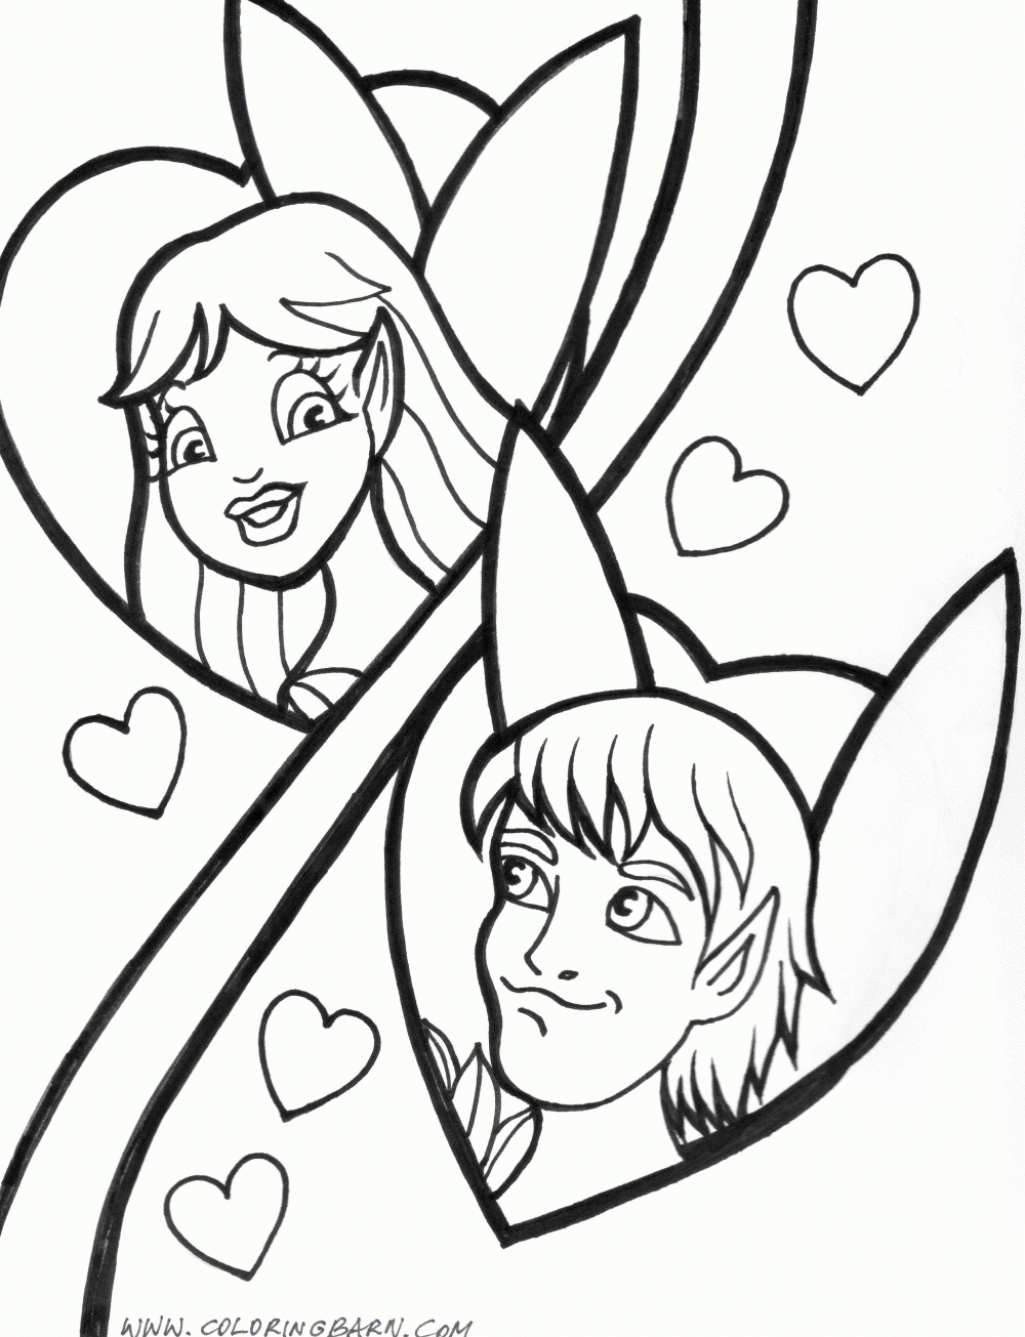 Cute Coloring Pages For Your Boyfriend Coloringpicts Coloring ...